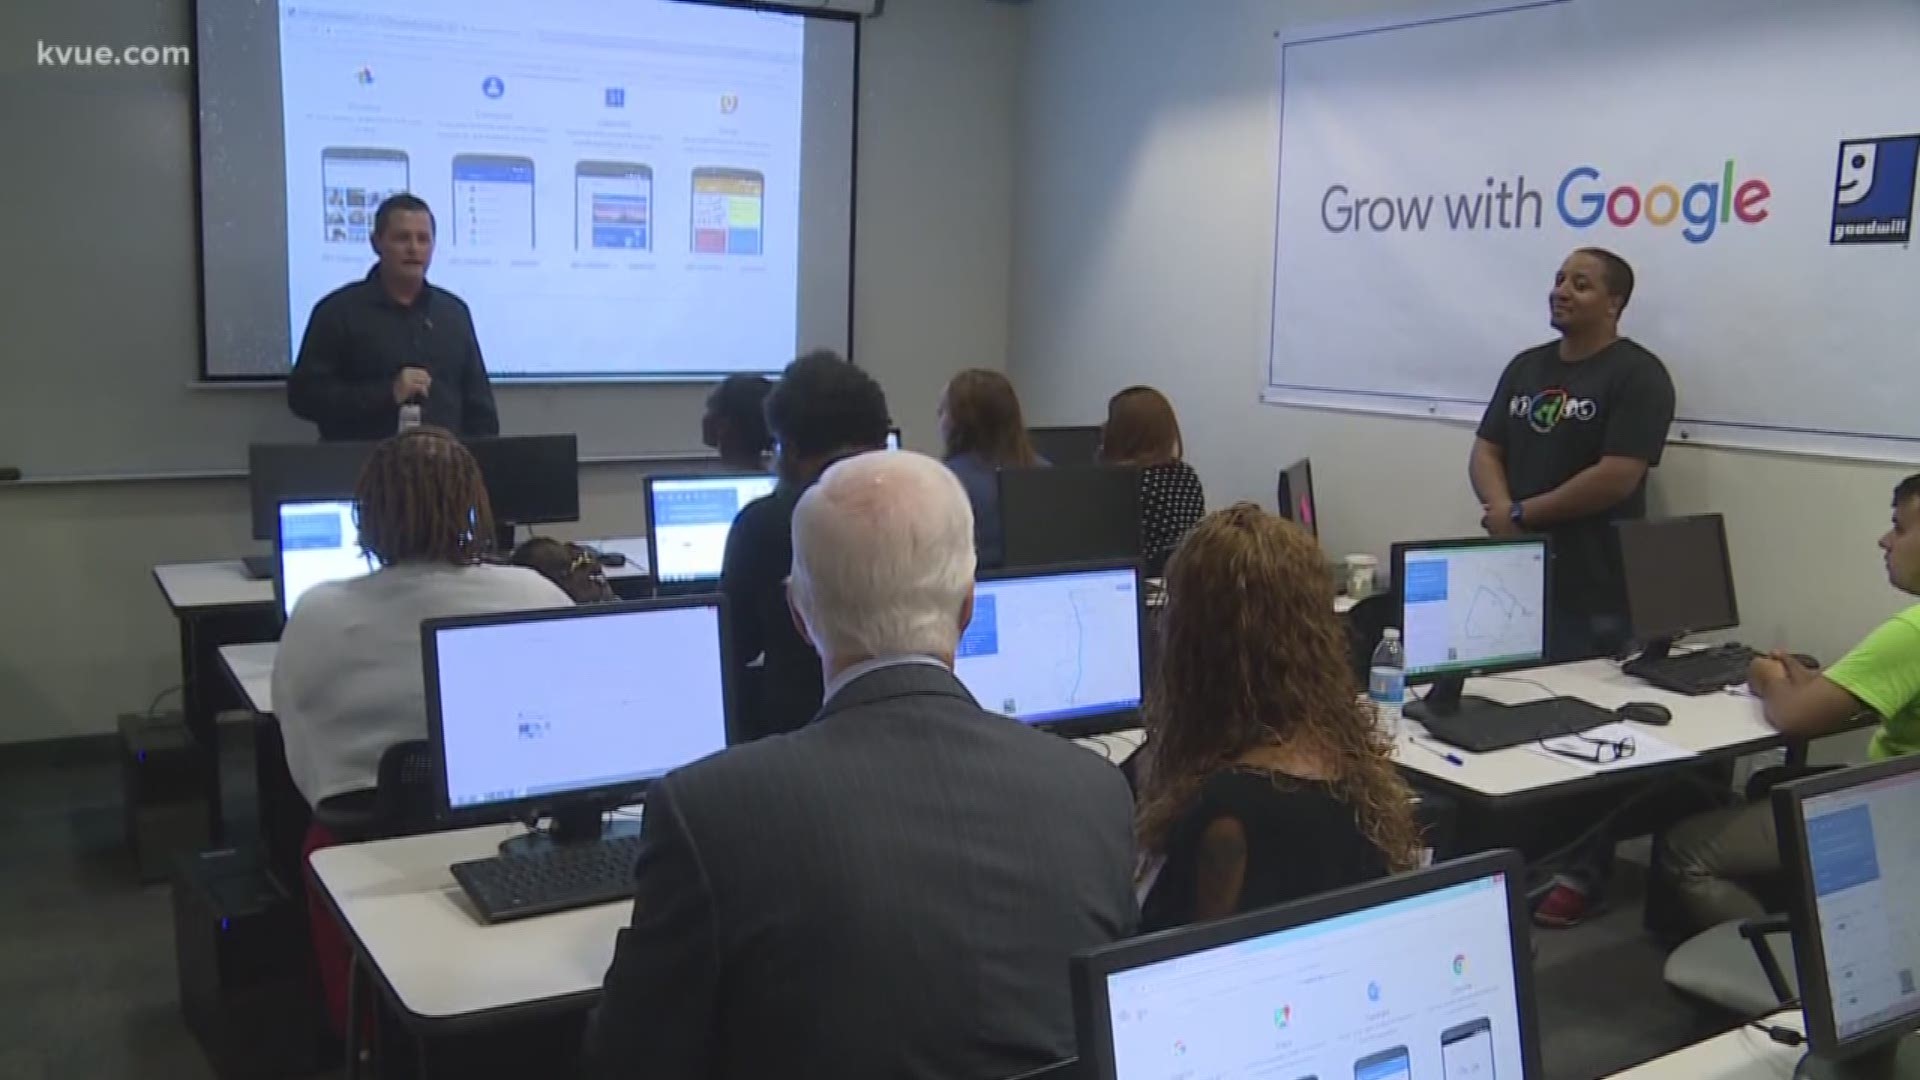 Only 42 percent of employees in the Texas workforce are digitally literate. Goodwill and Google are teaming up to fix that.